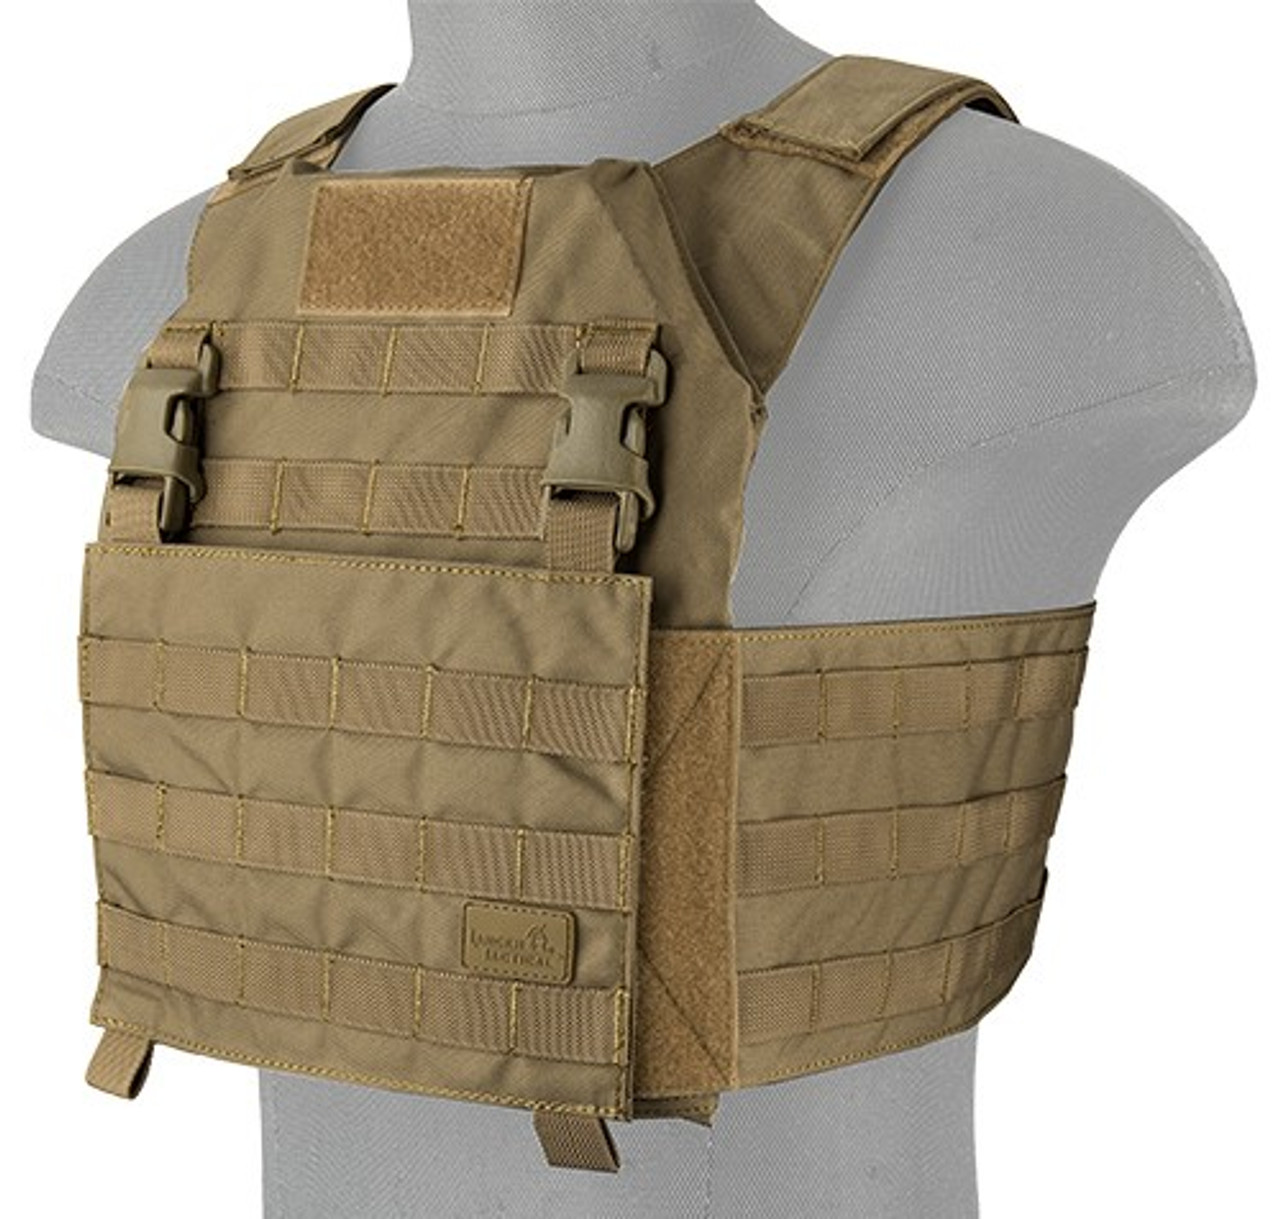 Lancer Tactical Adaptive Recon Plate Carrier, Fox Airsoft